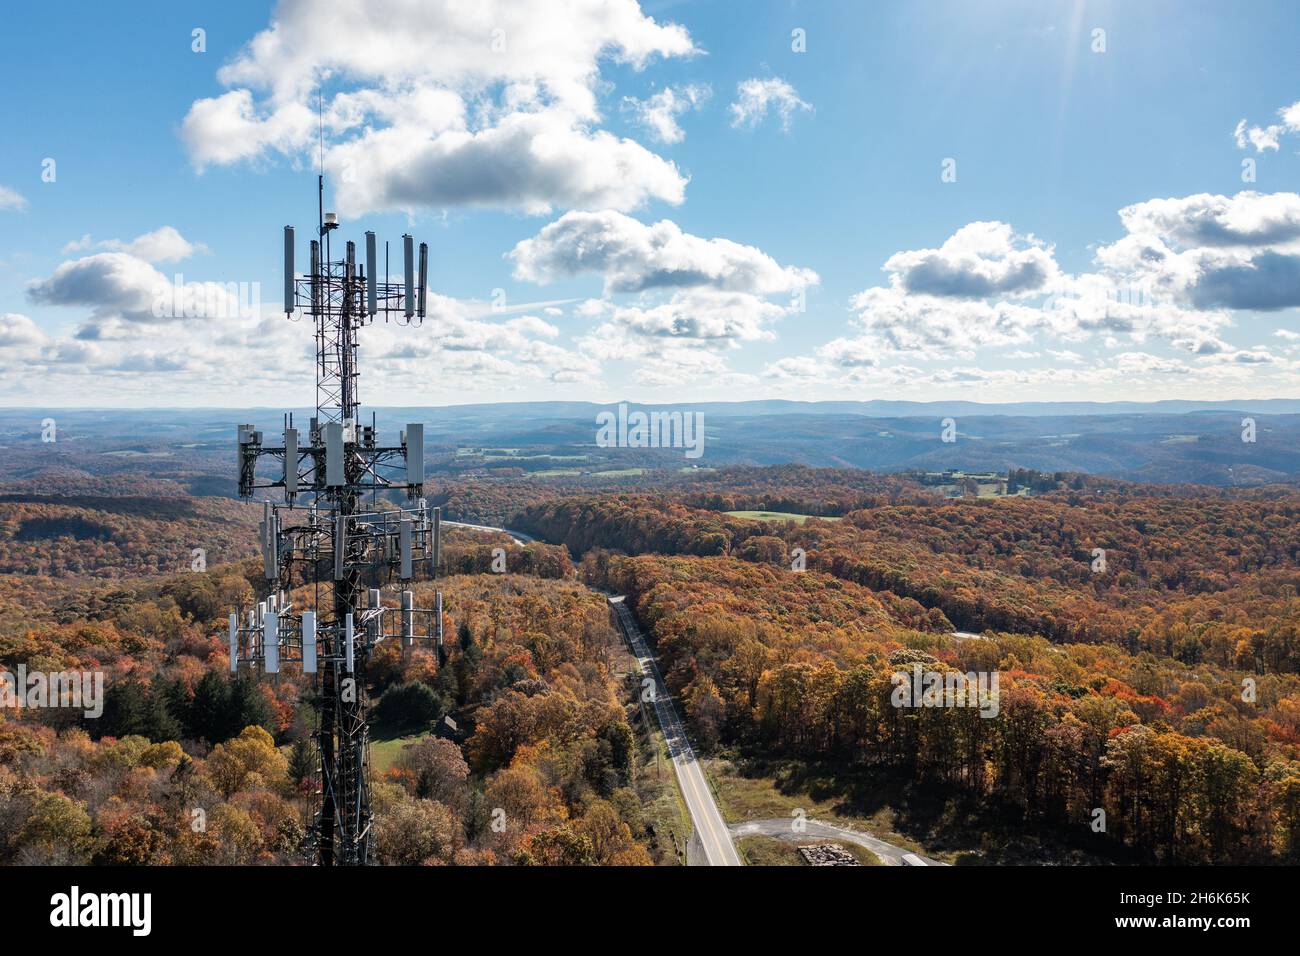 Aerial view of mobile phone cell tower over forested rural area of West Virginia to illustrate lack of broadband internet service Stock Photo